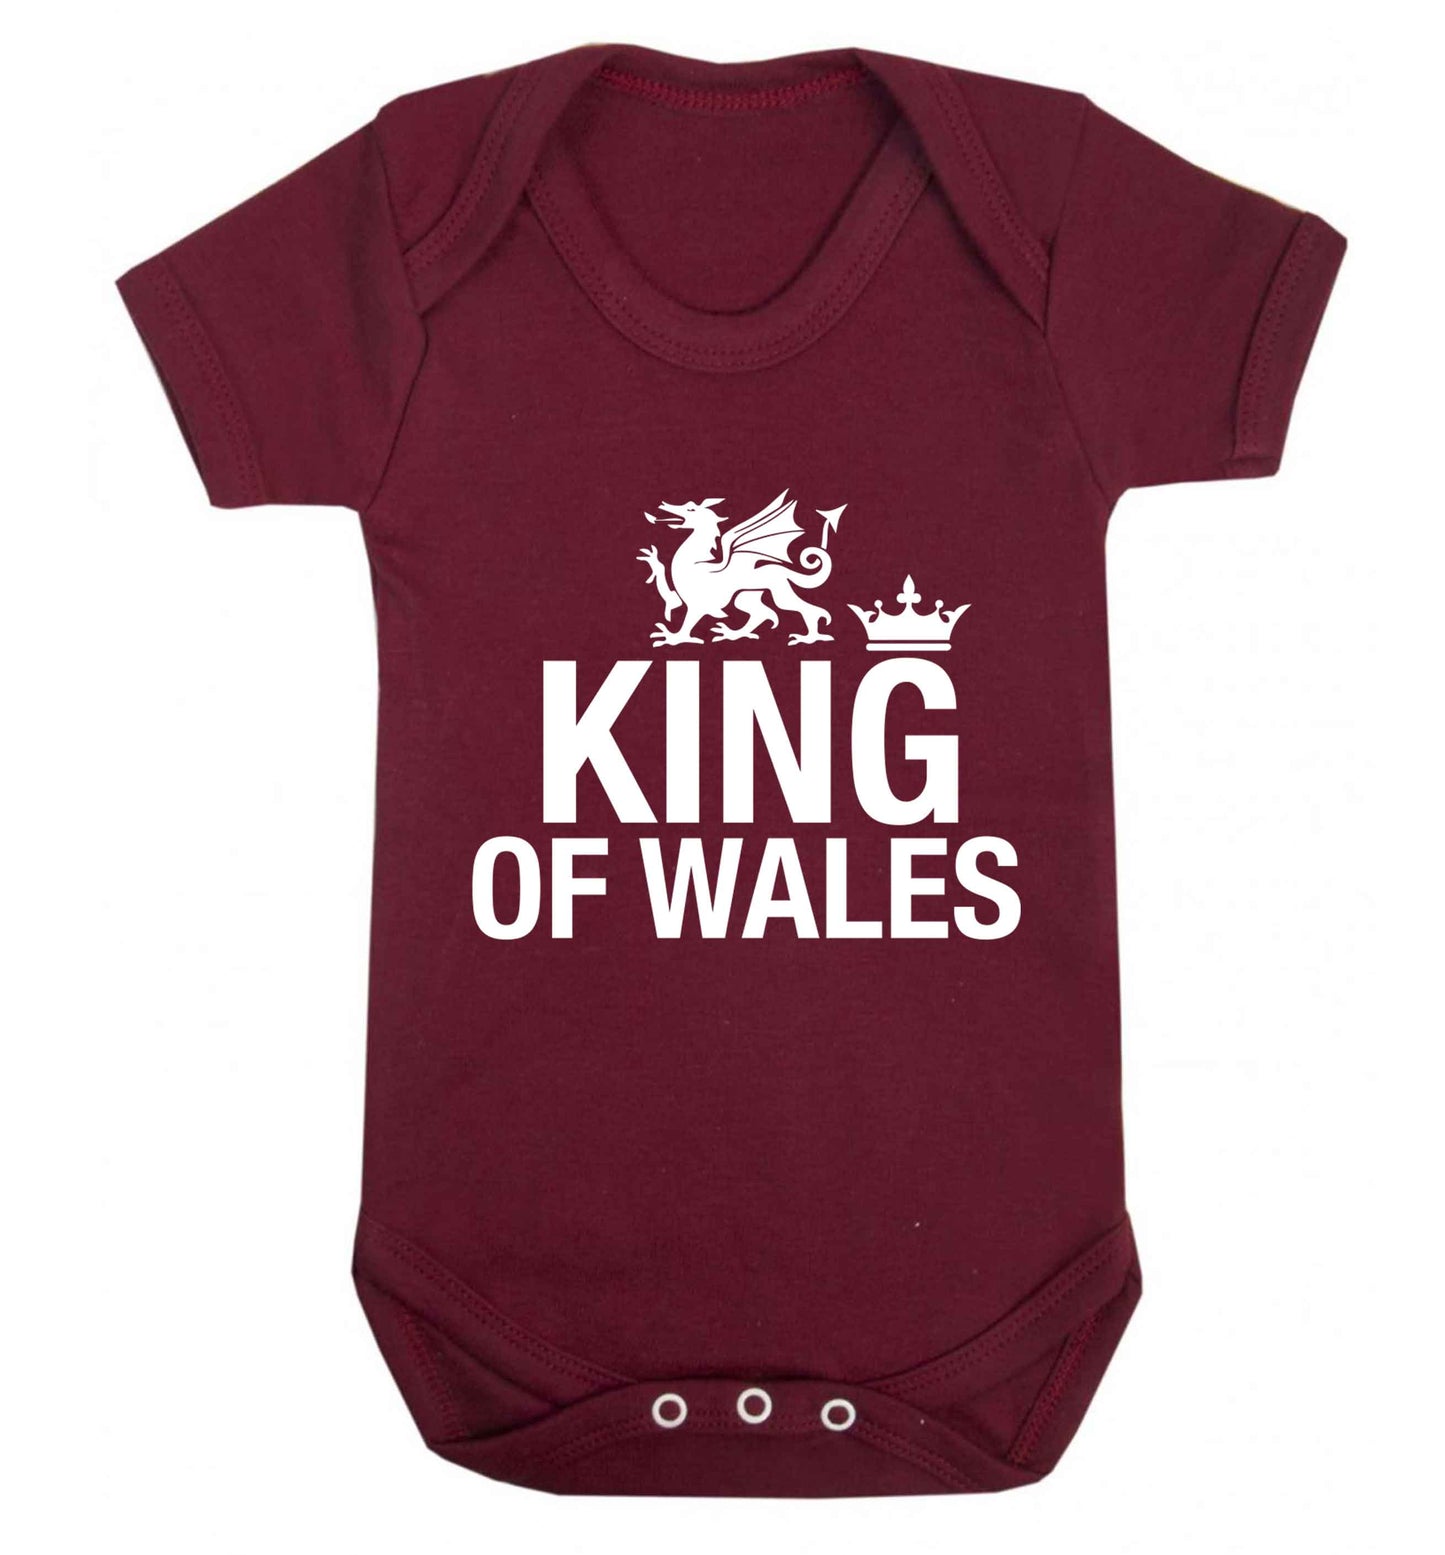 King of Wales Baby Vest maroon 18-24 months